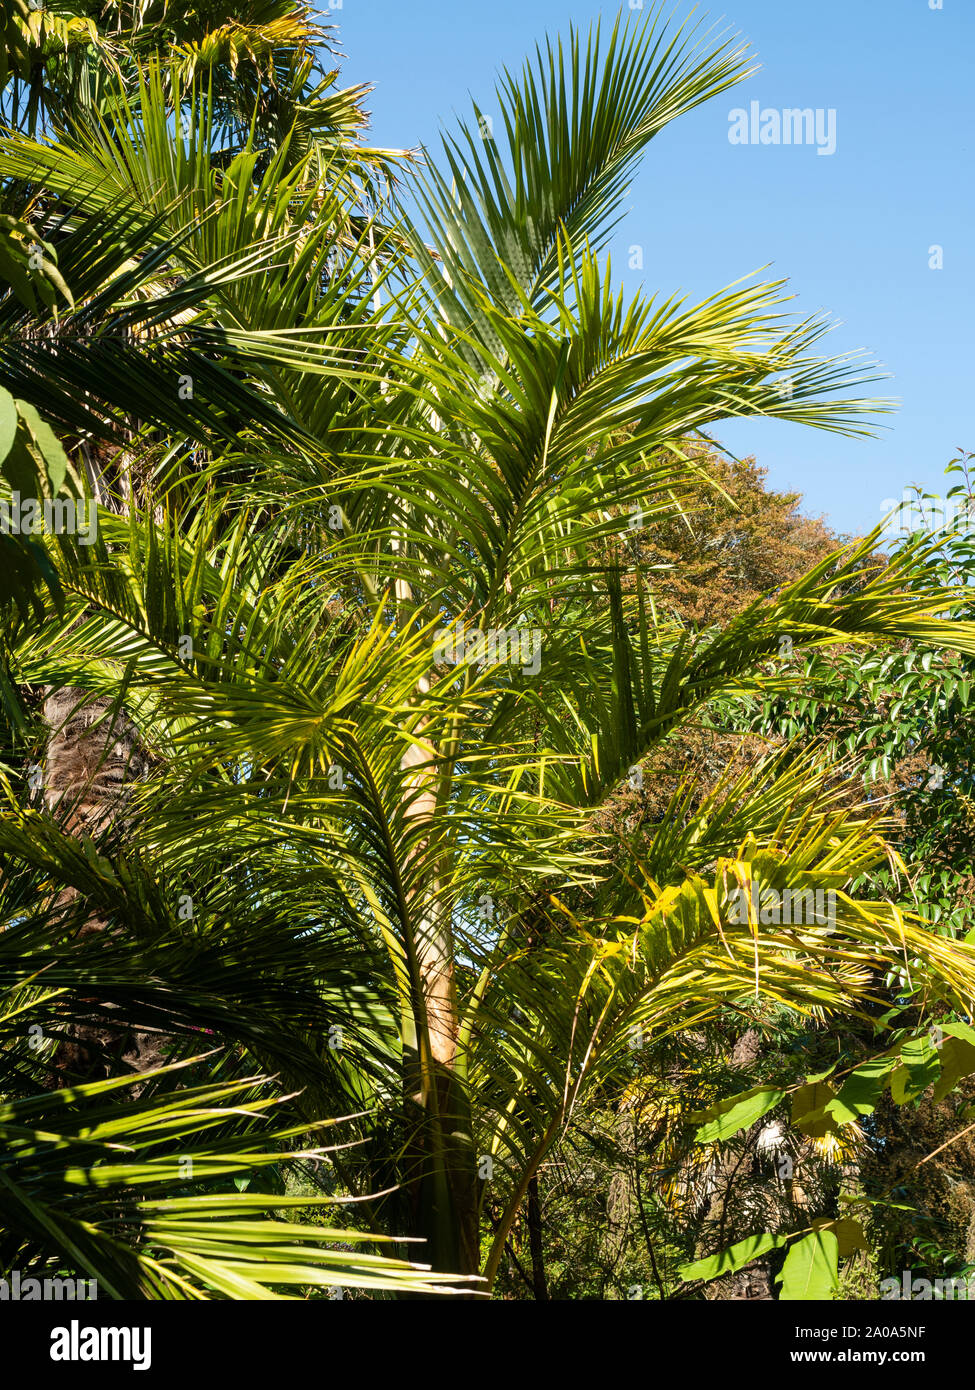 Juania australis, a rare, half hardy feather palm from the Juan Fernandez Islands off the coast of Chile Stock Photo